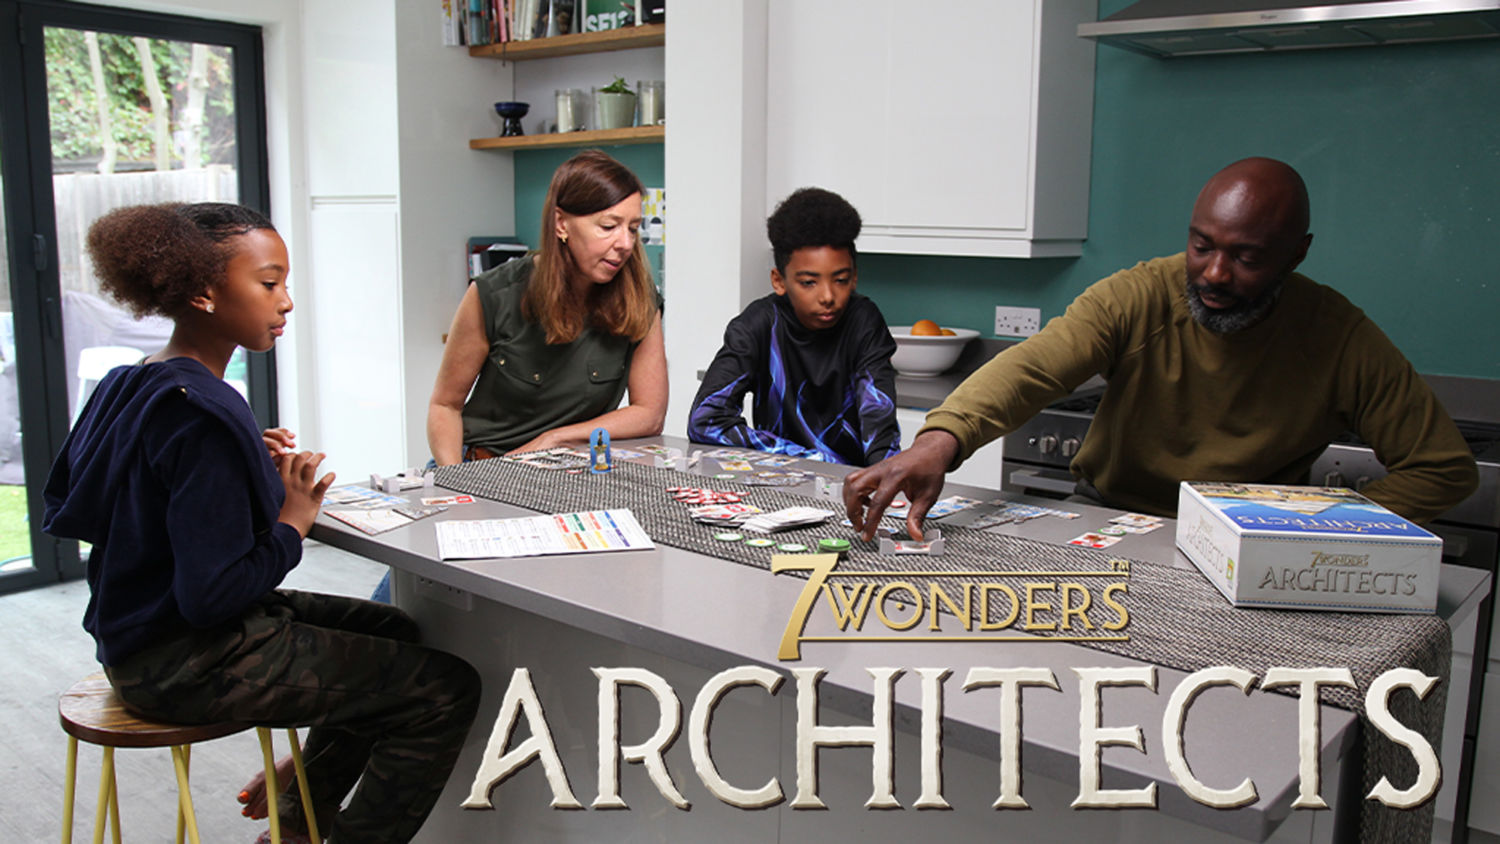 7 Wonders Architects Board Game